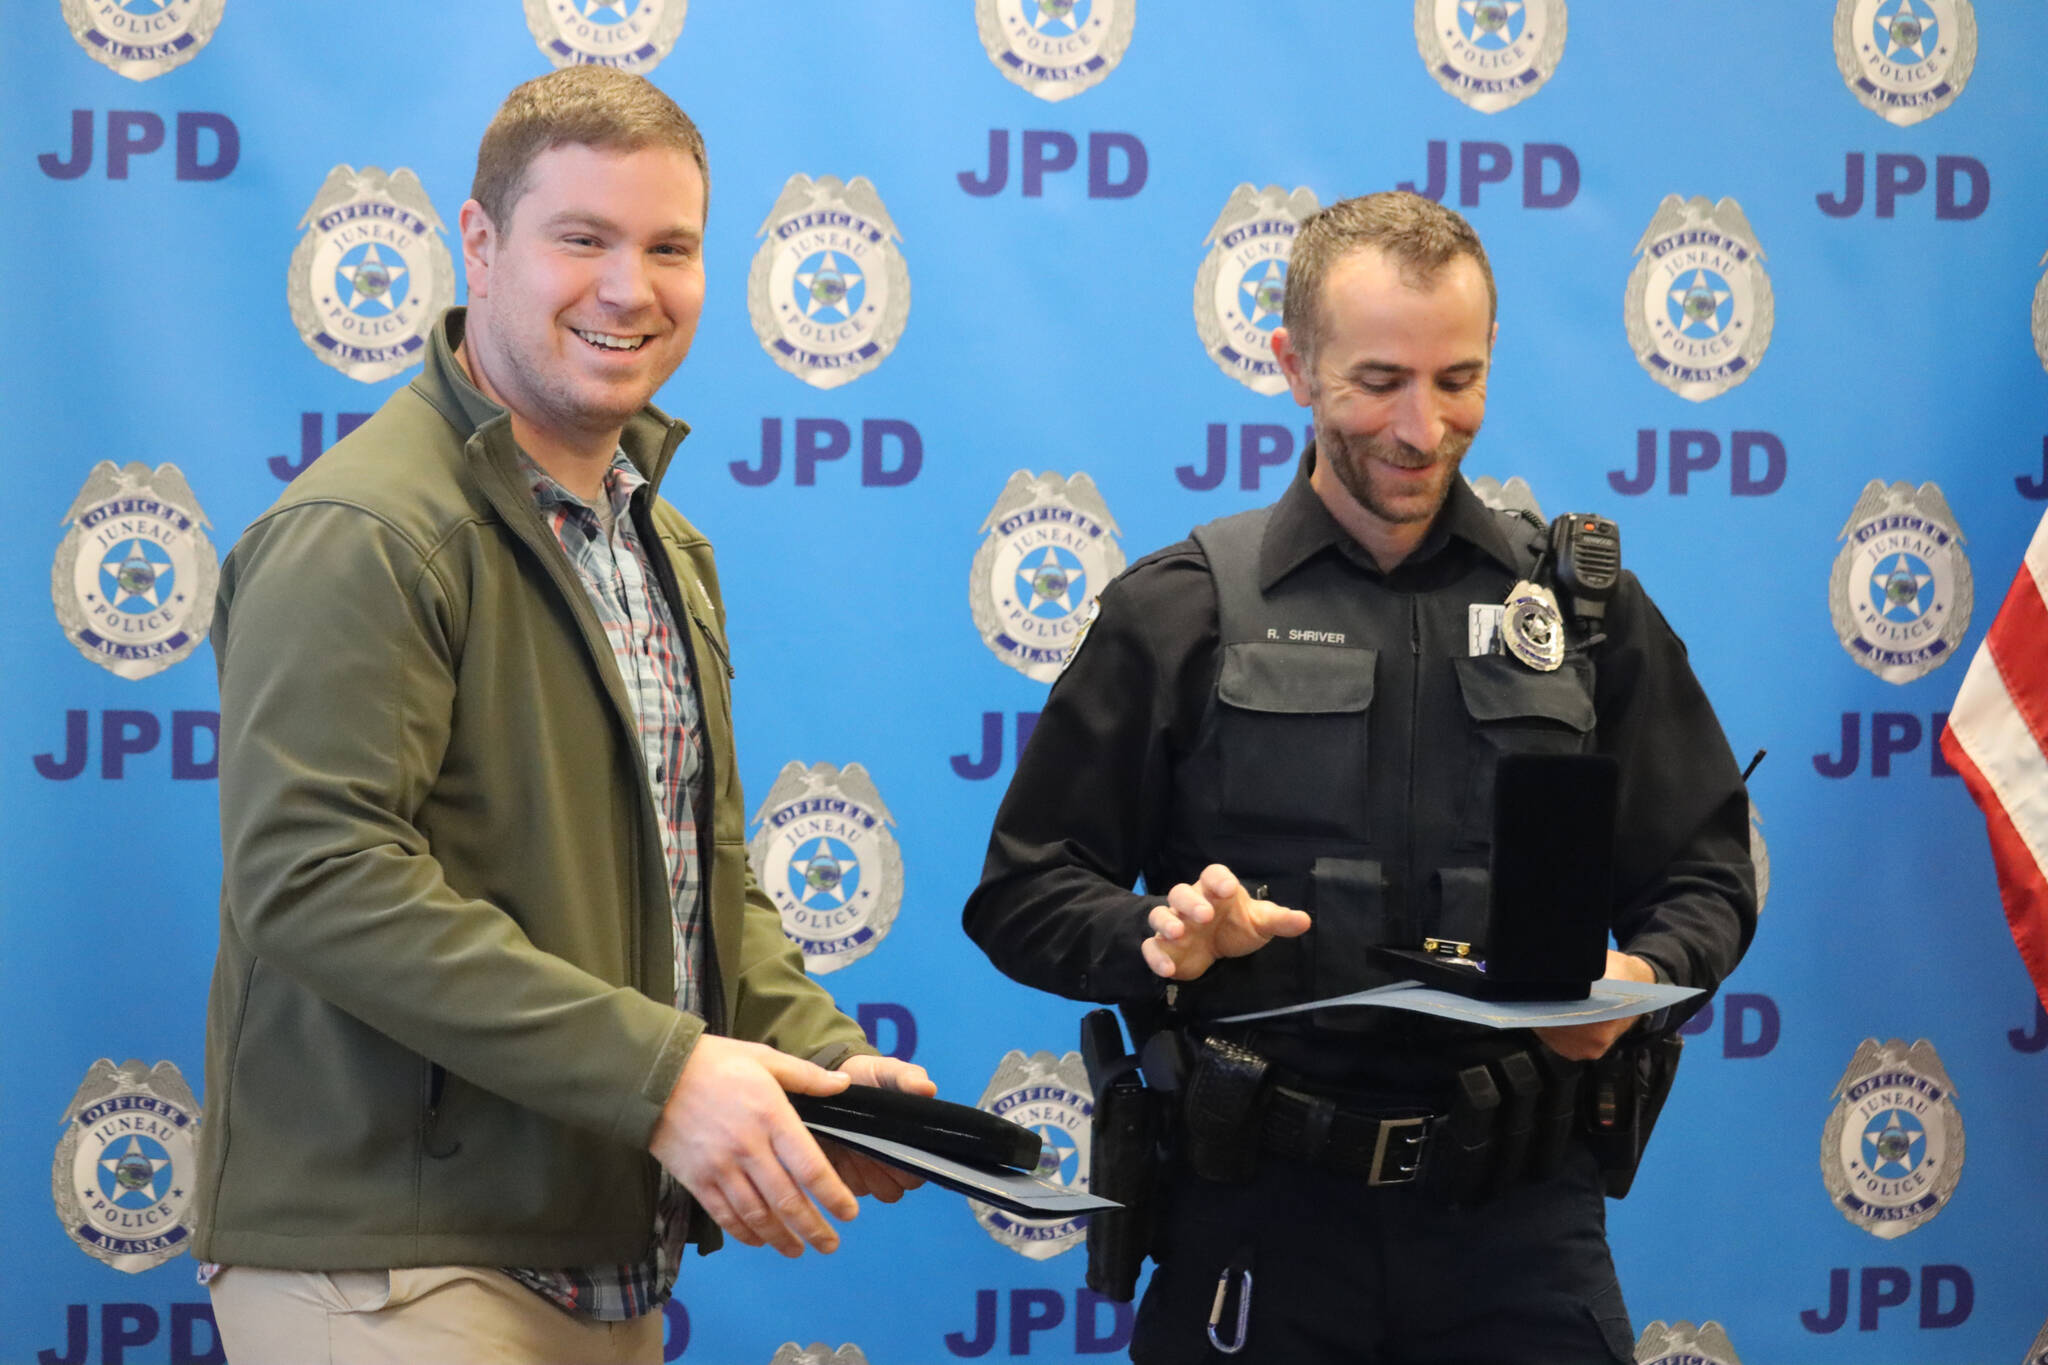 JPD Officers Patrick Vaughan and Ron Shriver receive awards for their involvement within the same incident during the department’s award ceremony on Monday. Vaughan received the Medal of Bravery and Shriver received the Outstanding Police Service Medal. (Jonson Kuhn / Juneau Empire)